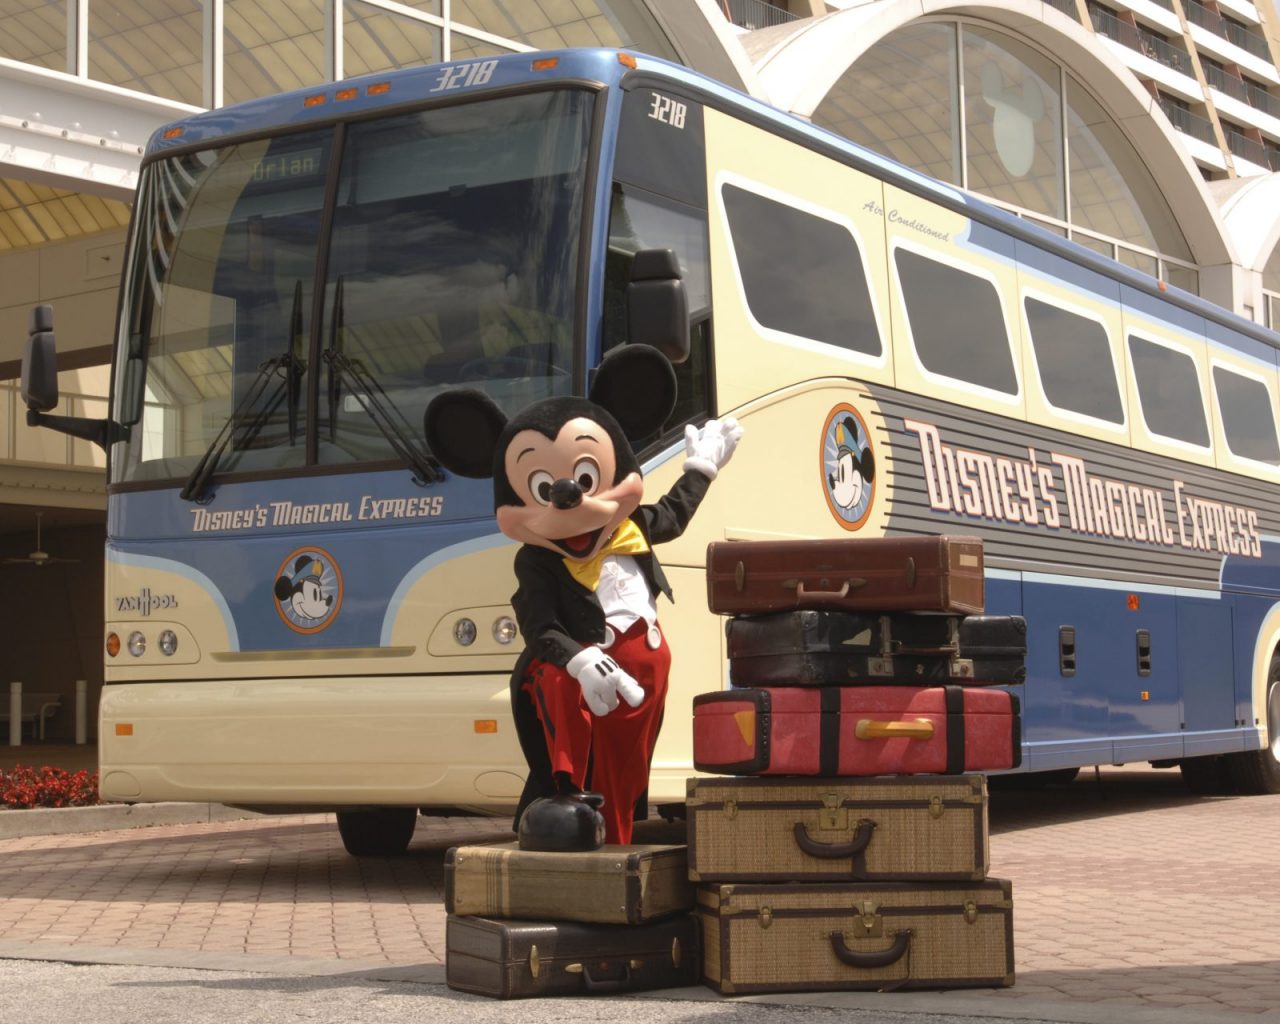 Mickey standing in front of the Disney Express bus